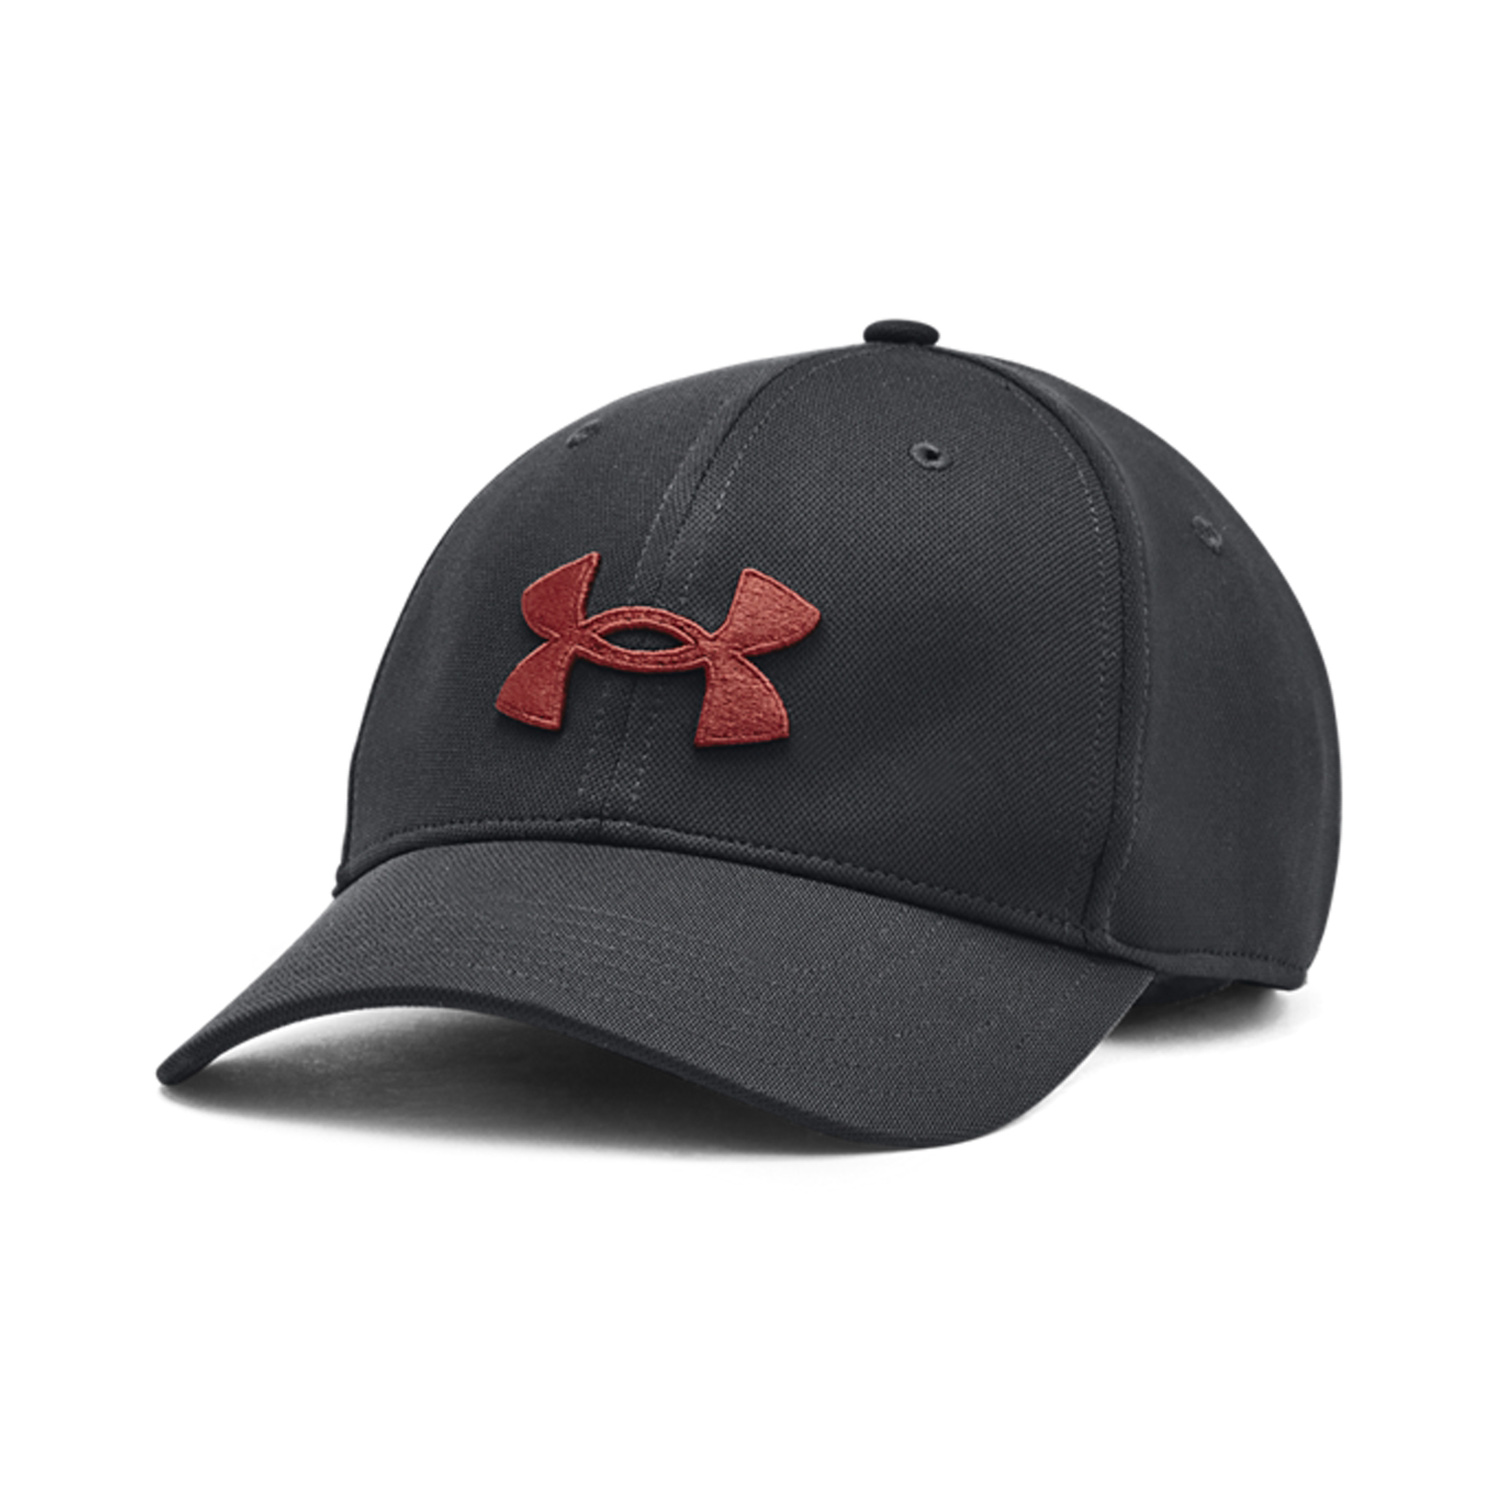 Under Armour Blitzing Cappello - Anthracite/Cinna Red